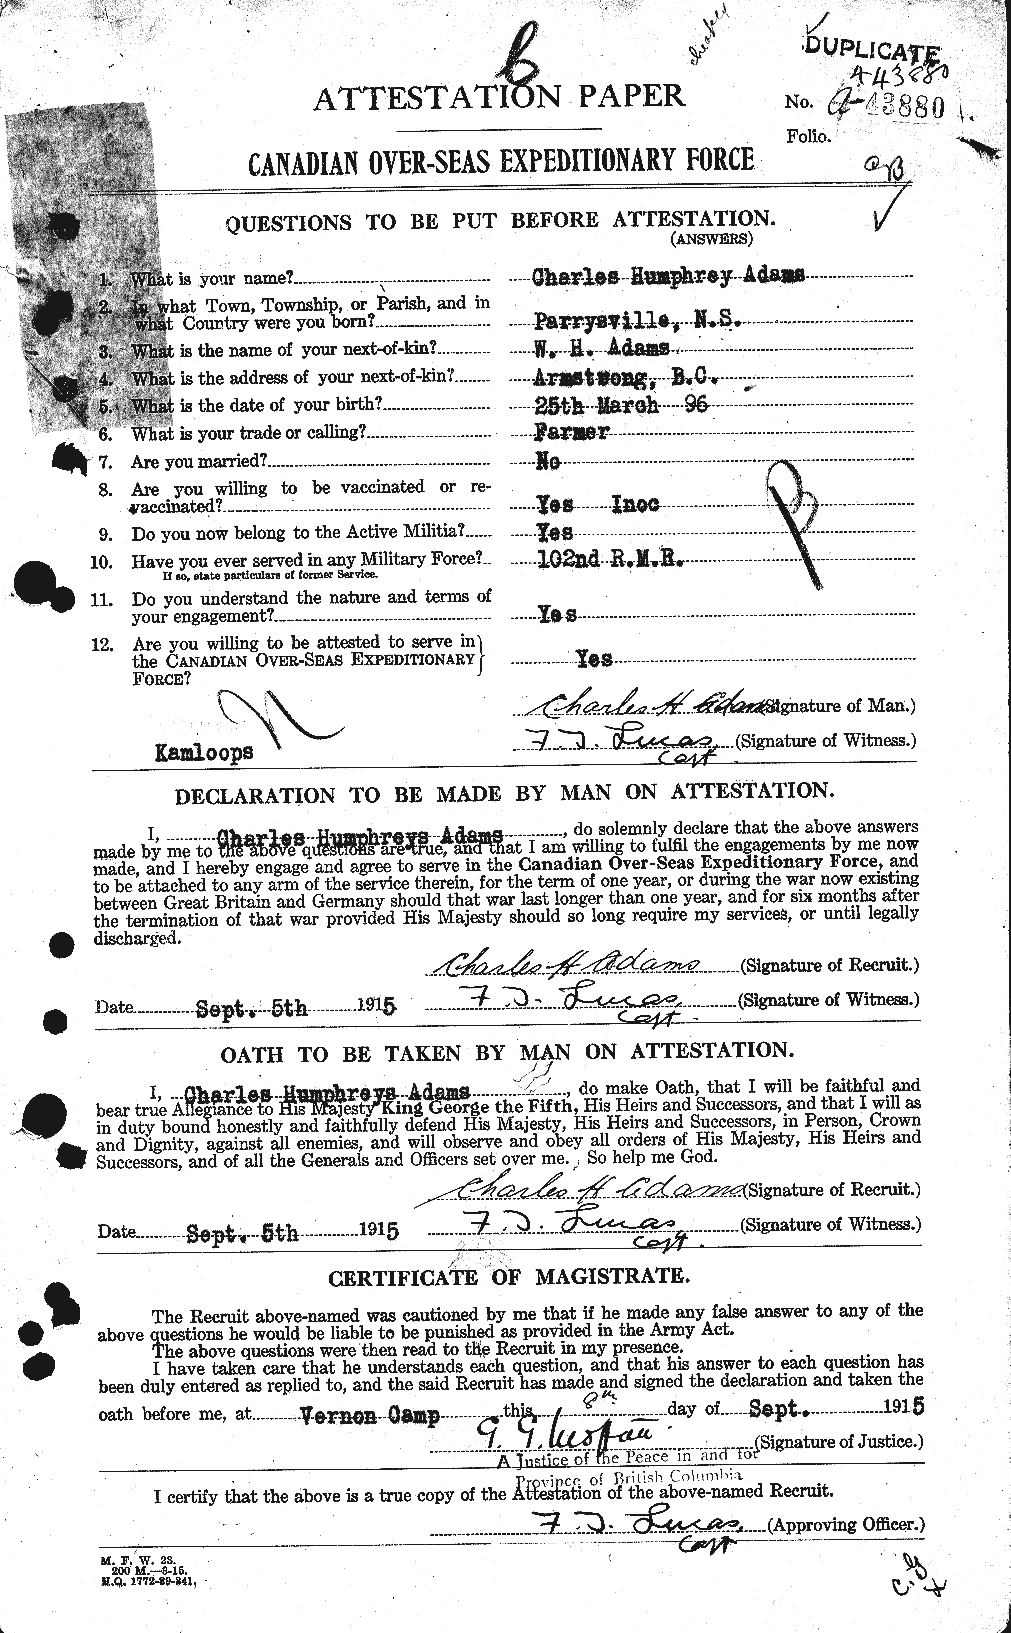 Personnel Records of the First World War - CEF 202570a